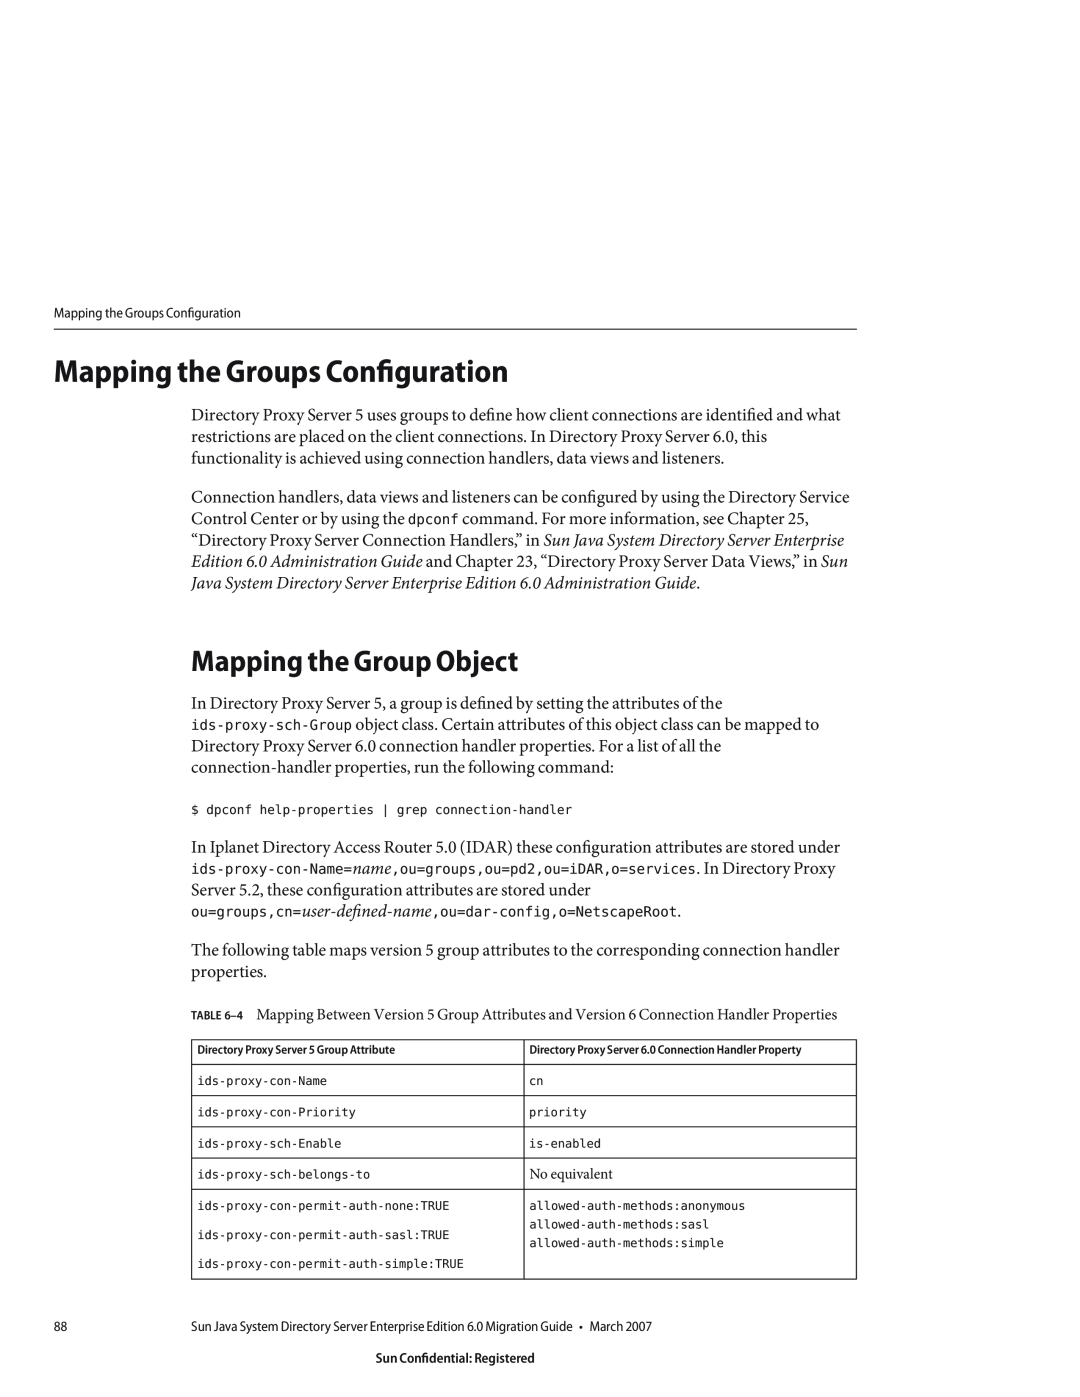 Sun Microsystems 8190994 manual Mapping the Groups Configuration, Mapping the Group Object 